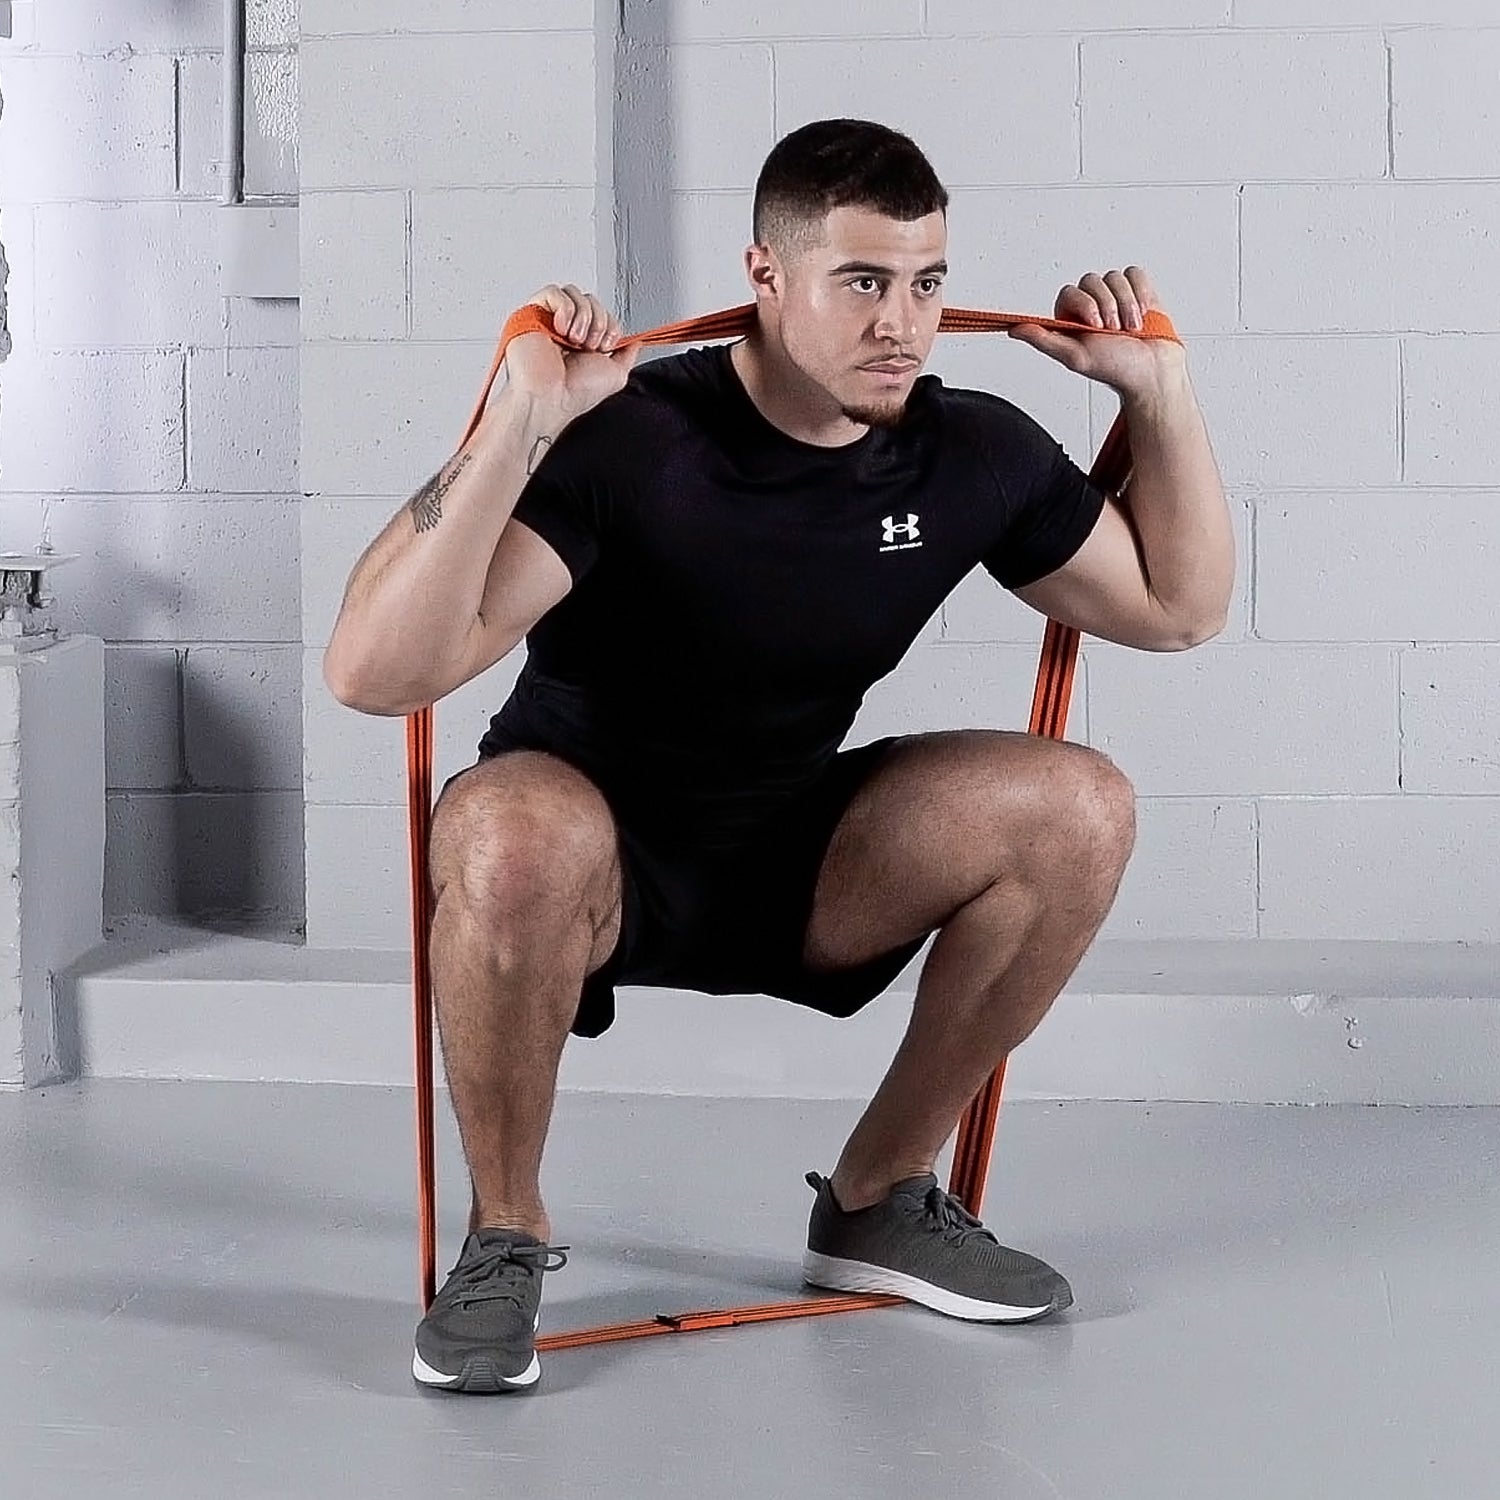 Resisted Squat Exercise Using the TRNR Strength Band